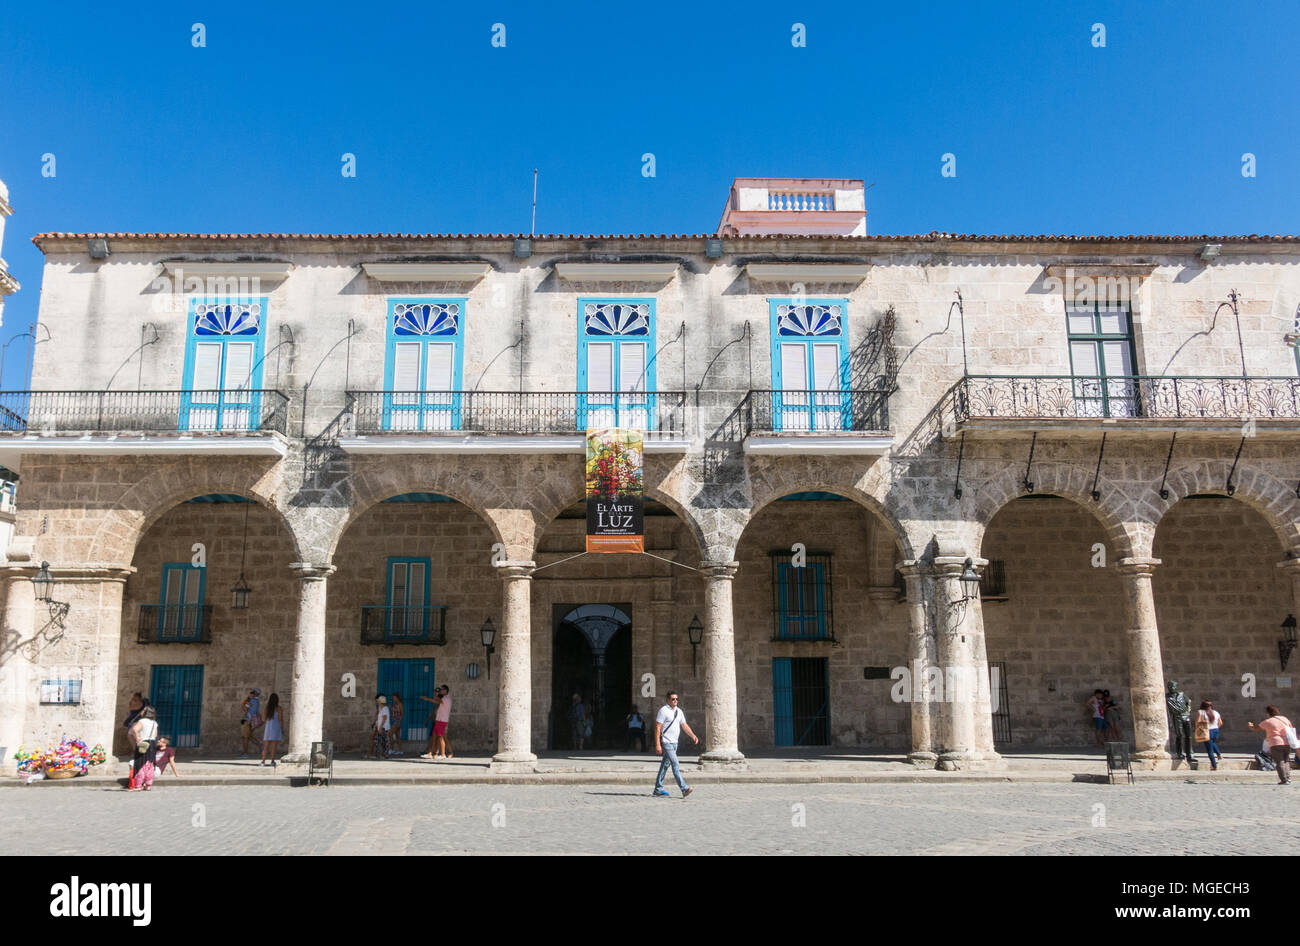 HAVANA, CUBA - JANUARY 16, 2017: Arcades of the Palace of the Conde Lombillo. in the Cathedral Square, Old Havana, Cuba. Stock Photo